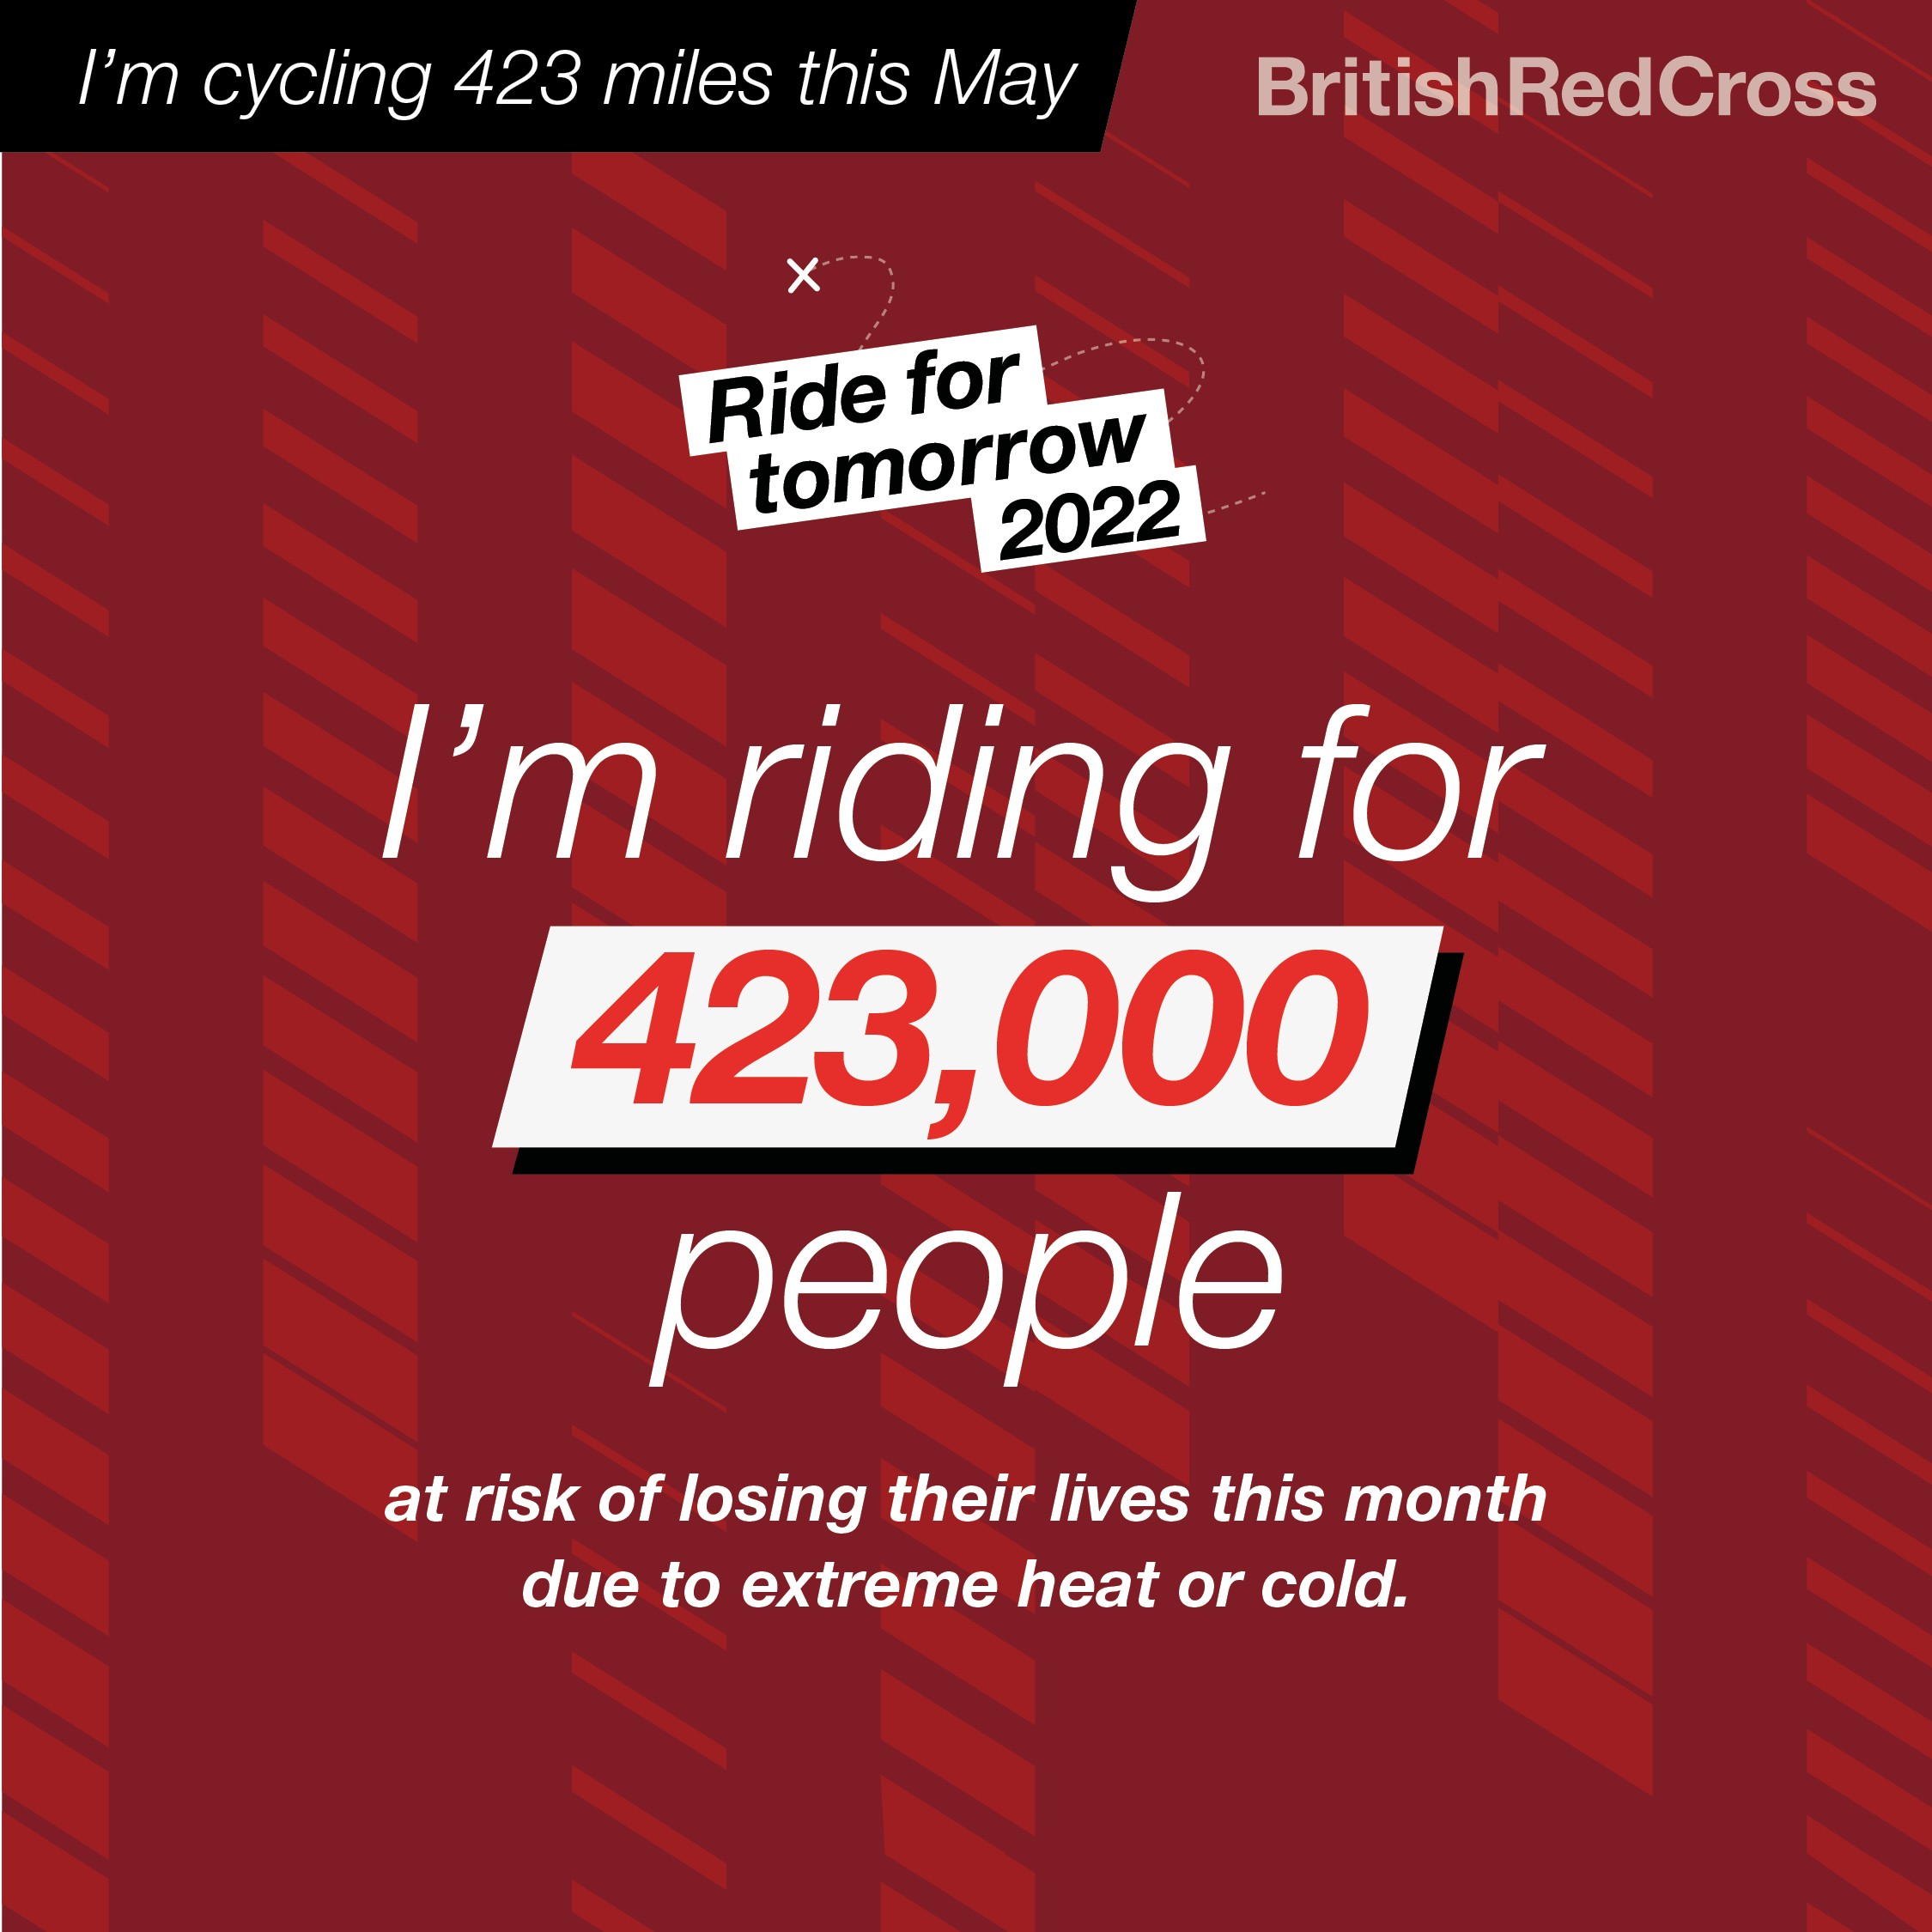 Text on a red background. 'I'm cycling 423 miles this May. I'm riding for 423,000 people at risk of losing their lives this month due to extreme heat or cold'.